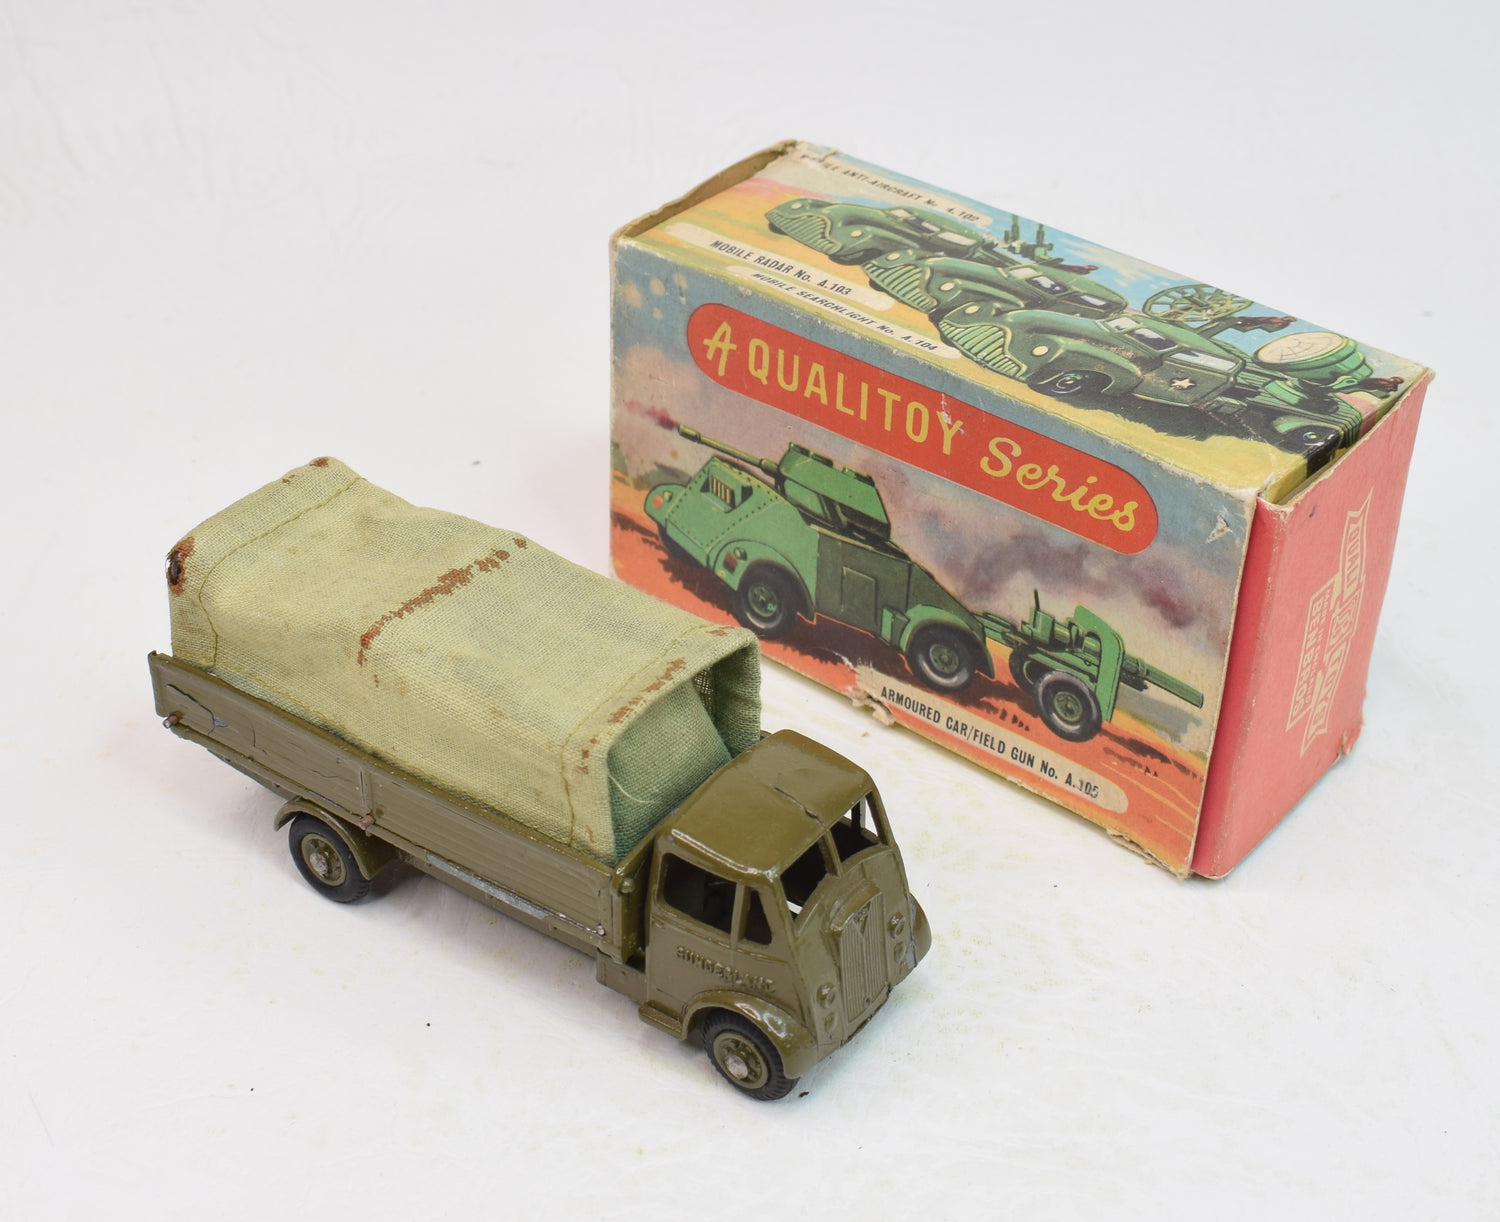 Benbros Qualitoy A106 Sunderland Covered Wagon Very Near Mint/Boxed The 'Heritage' Collection